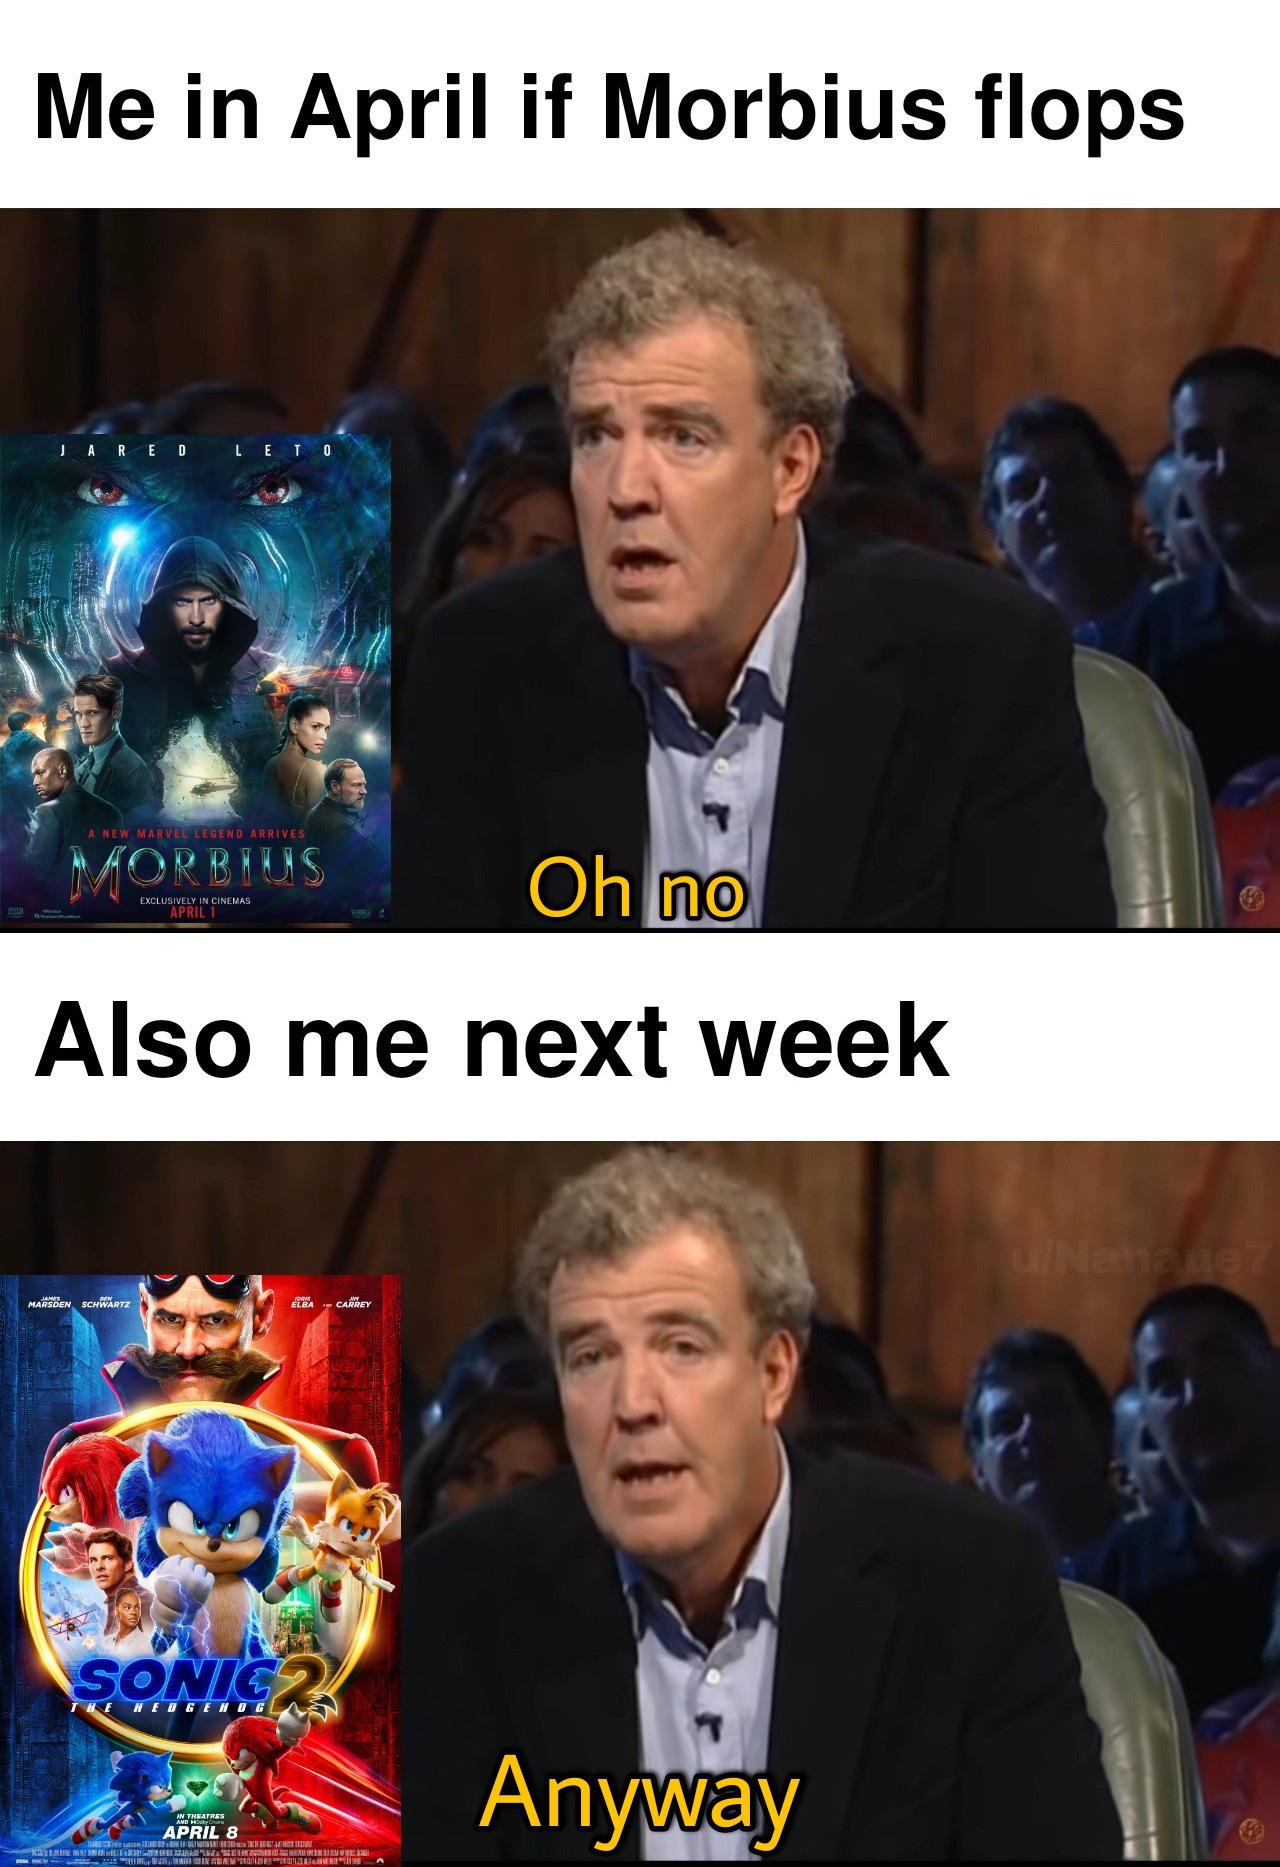 funny gaming memes - hololive moments meme - Me in April if Morbius flops Ia Red Leto A New Marvel Legend Arrives Morbius Oh no Exclusively In Cinemas April 1 Also me next week uNanauez Marsden Schwartz Elba Carrey Sonic In Eugenigla Anyway An Theatres Ap